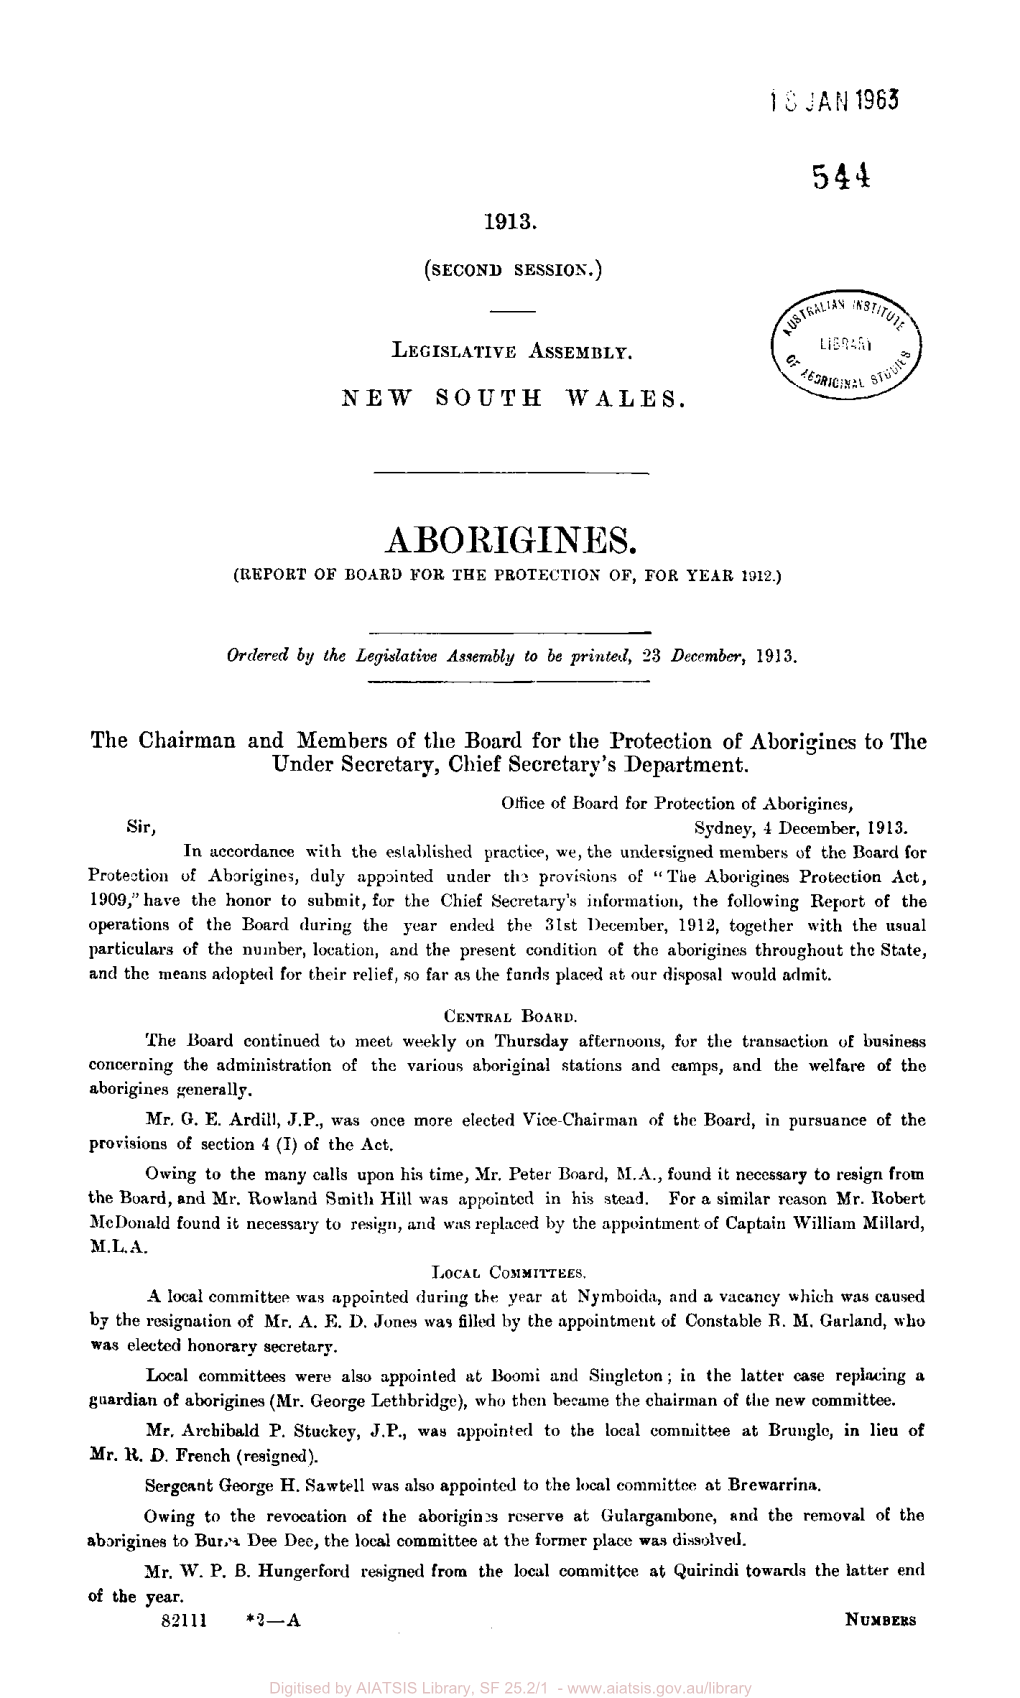 Aborigines, Report of Board for the Protection Of, for Year 1912